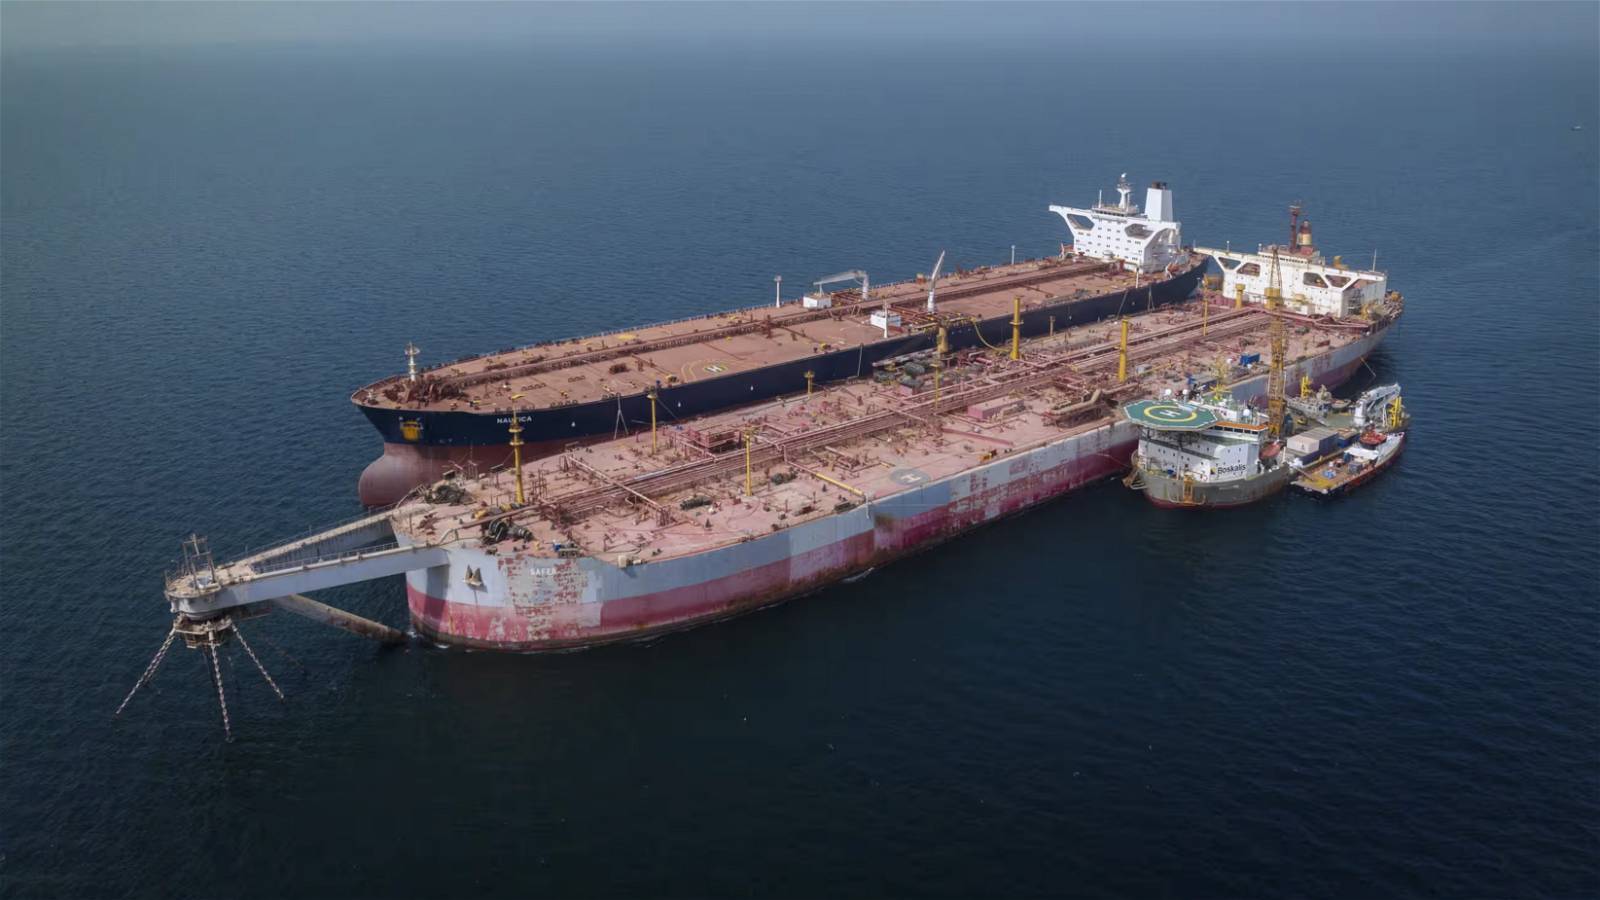 The remarkable story of how Yemen’s oil tanker disaster was averted by crowdfunding